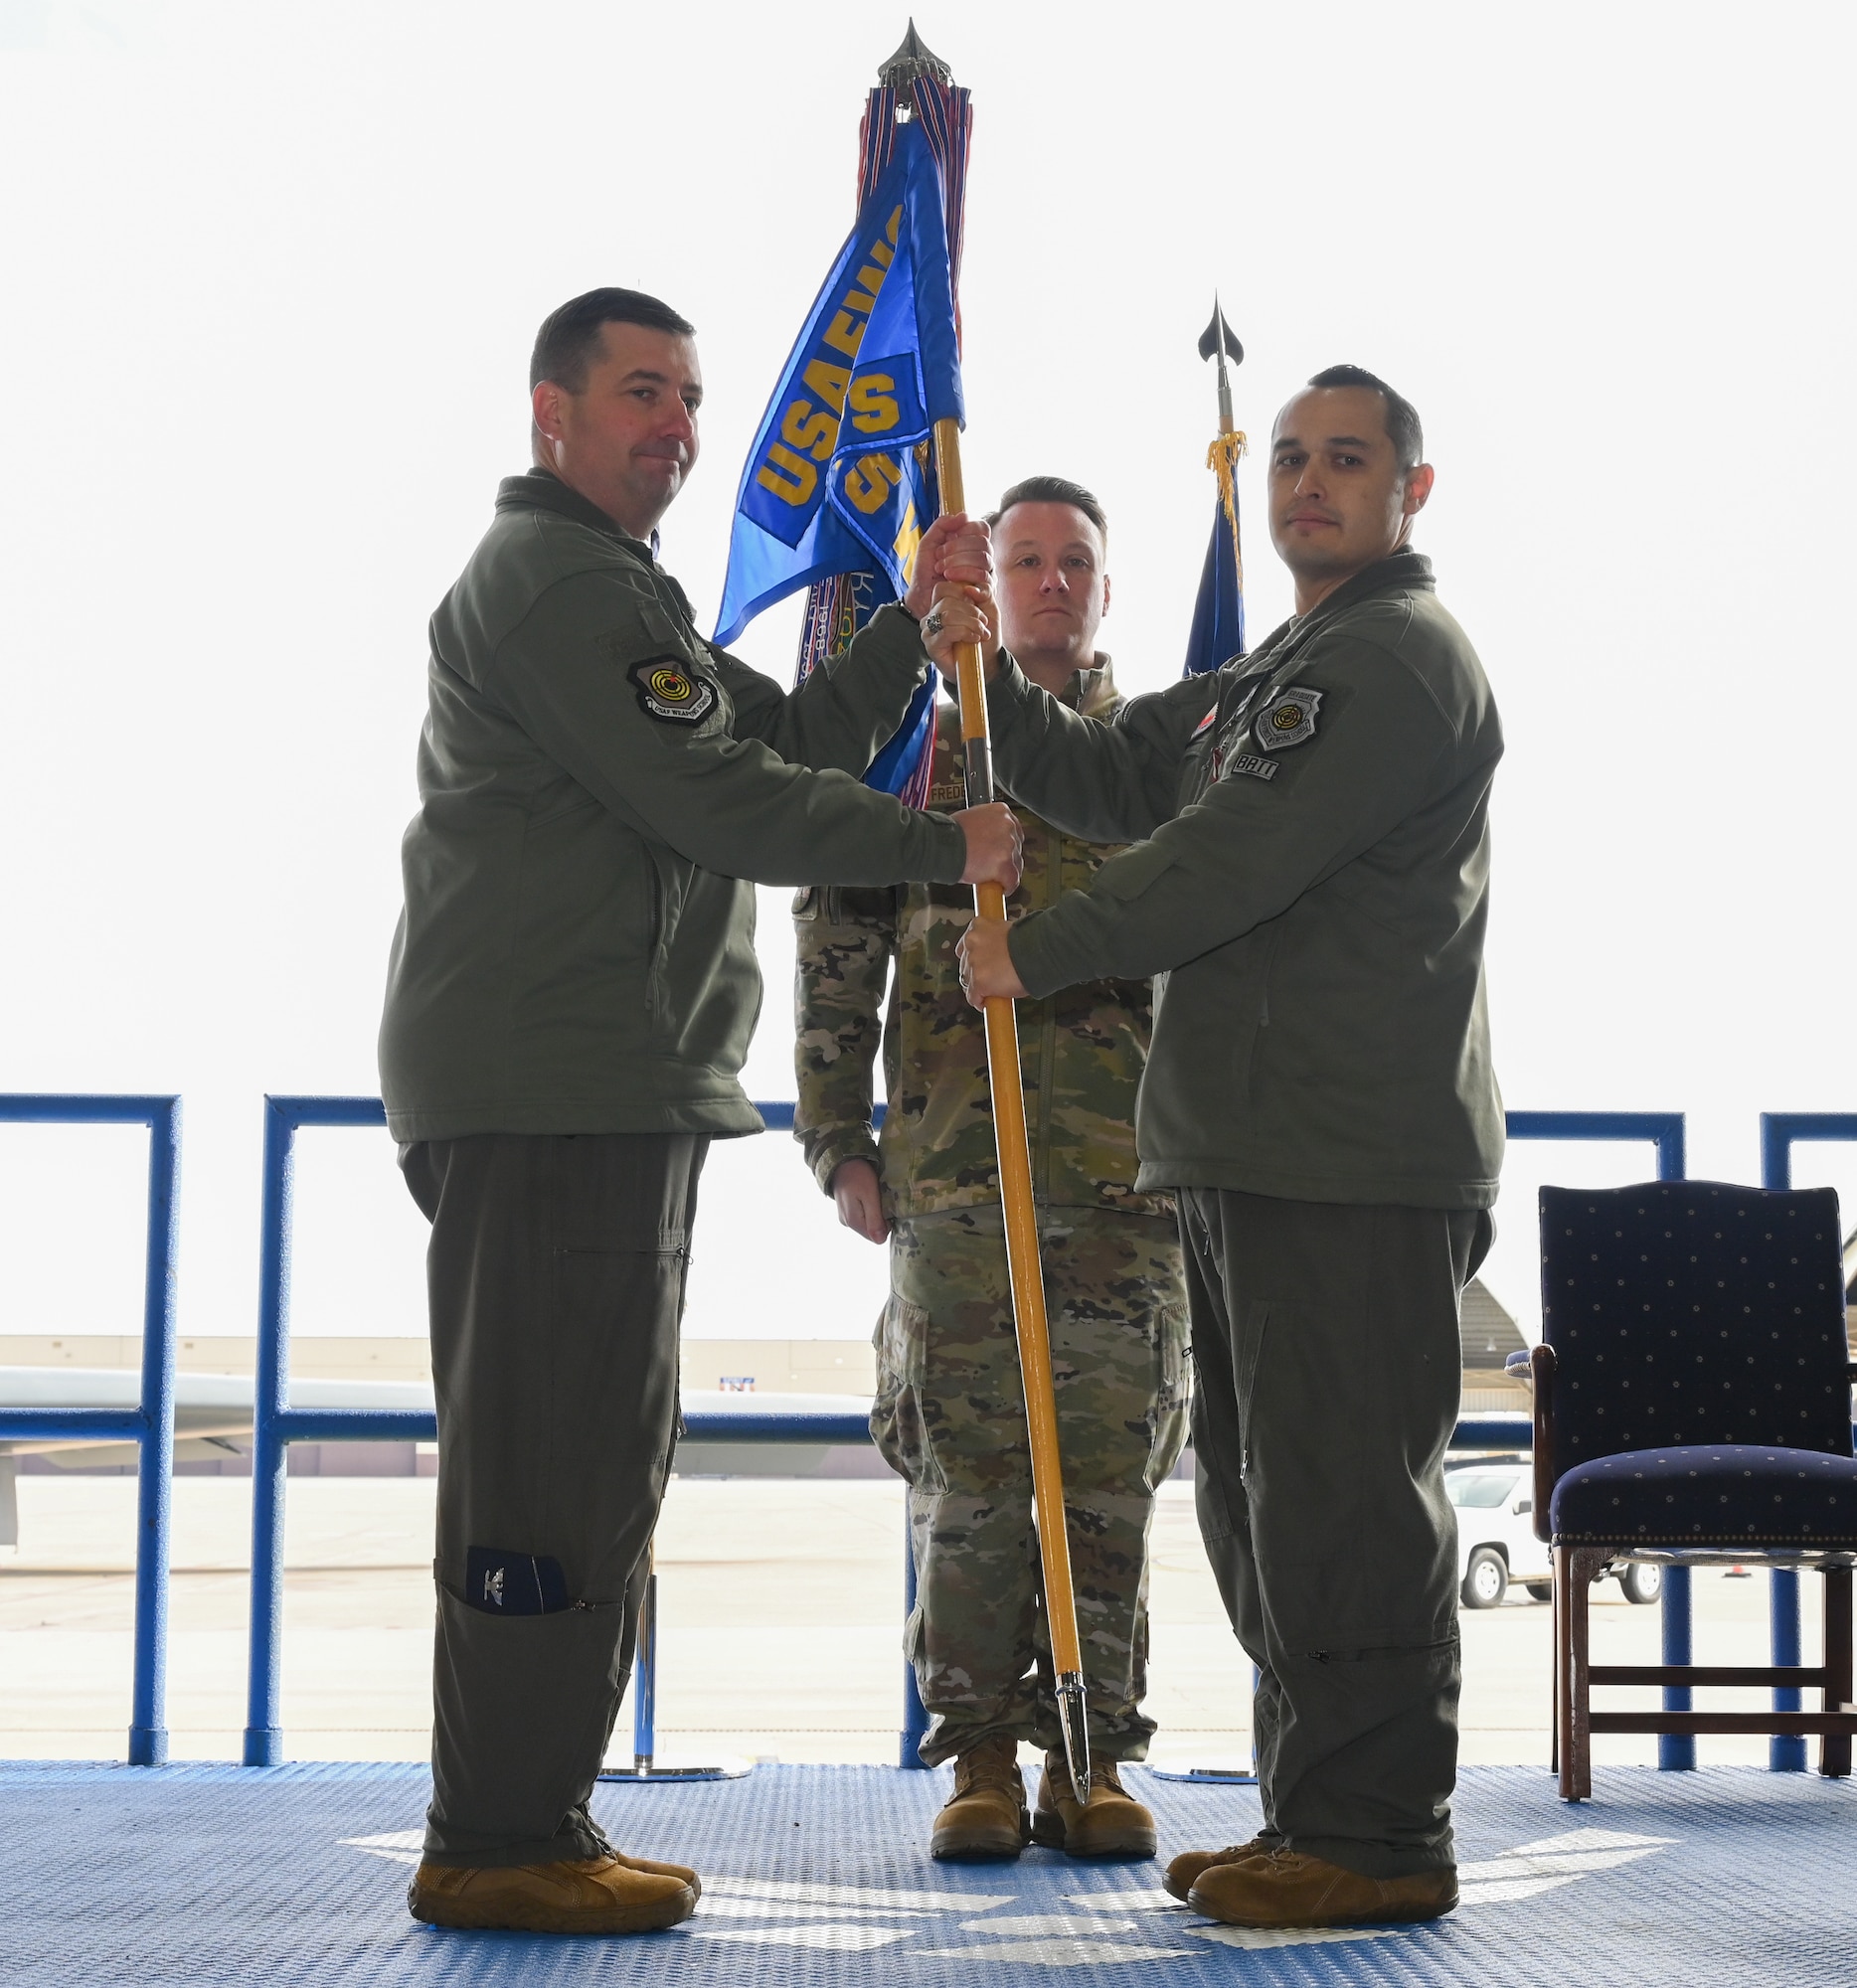 Lt. Col. Marcus Antonini, previous 325th Weapons Squadron, 57th Wing (right), relinquishes command with the guidon to Col. Daniel Lehoski, United States Air Force Weapons School Commandant (left), at Whiteman Air Force Base, Missouri, December 14, 2022. The guidon represents the authority of a commander that is passed on to another. (U.S. Air Force photo by Airman 1st Class Joseph Garcia)